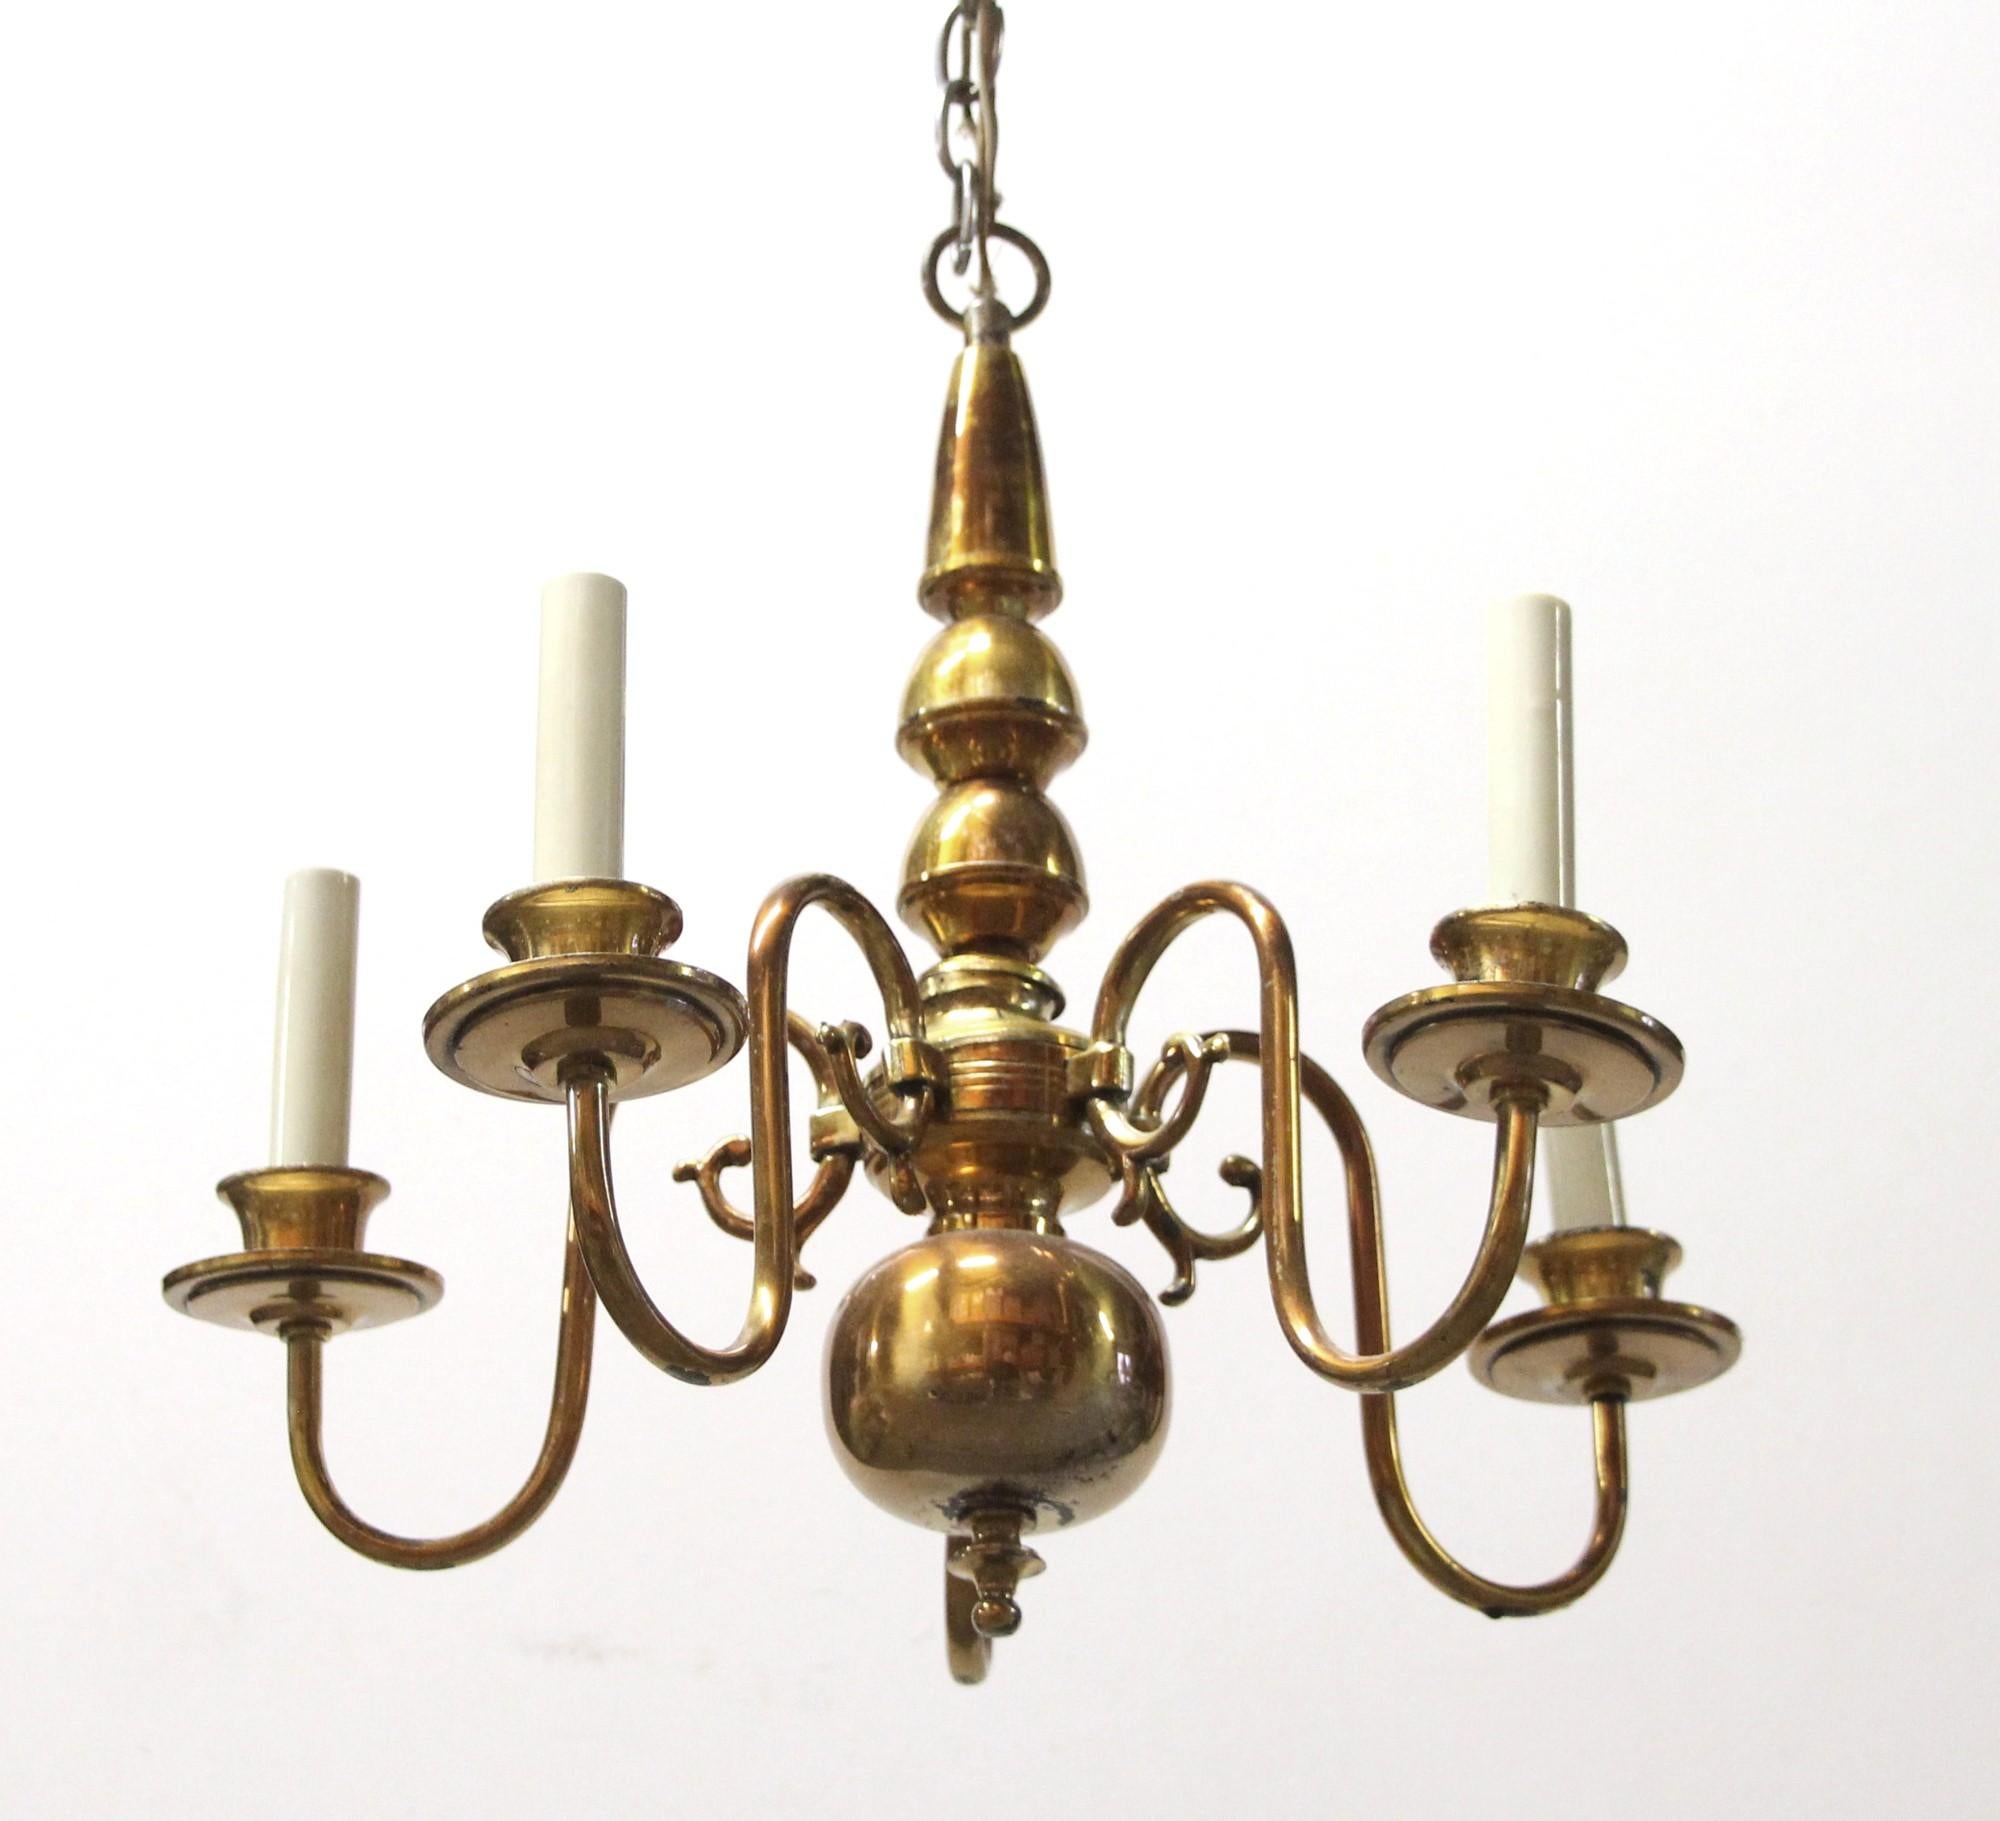 Simple 20th century brass 5 arm chandelier with copper finish originally from the 39th floor of the Waldorf Astoria Hotel on Park Ave in NYC. Waldorf Astoria authenticity card included with your purchase. This light has not been restored. Please